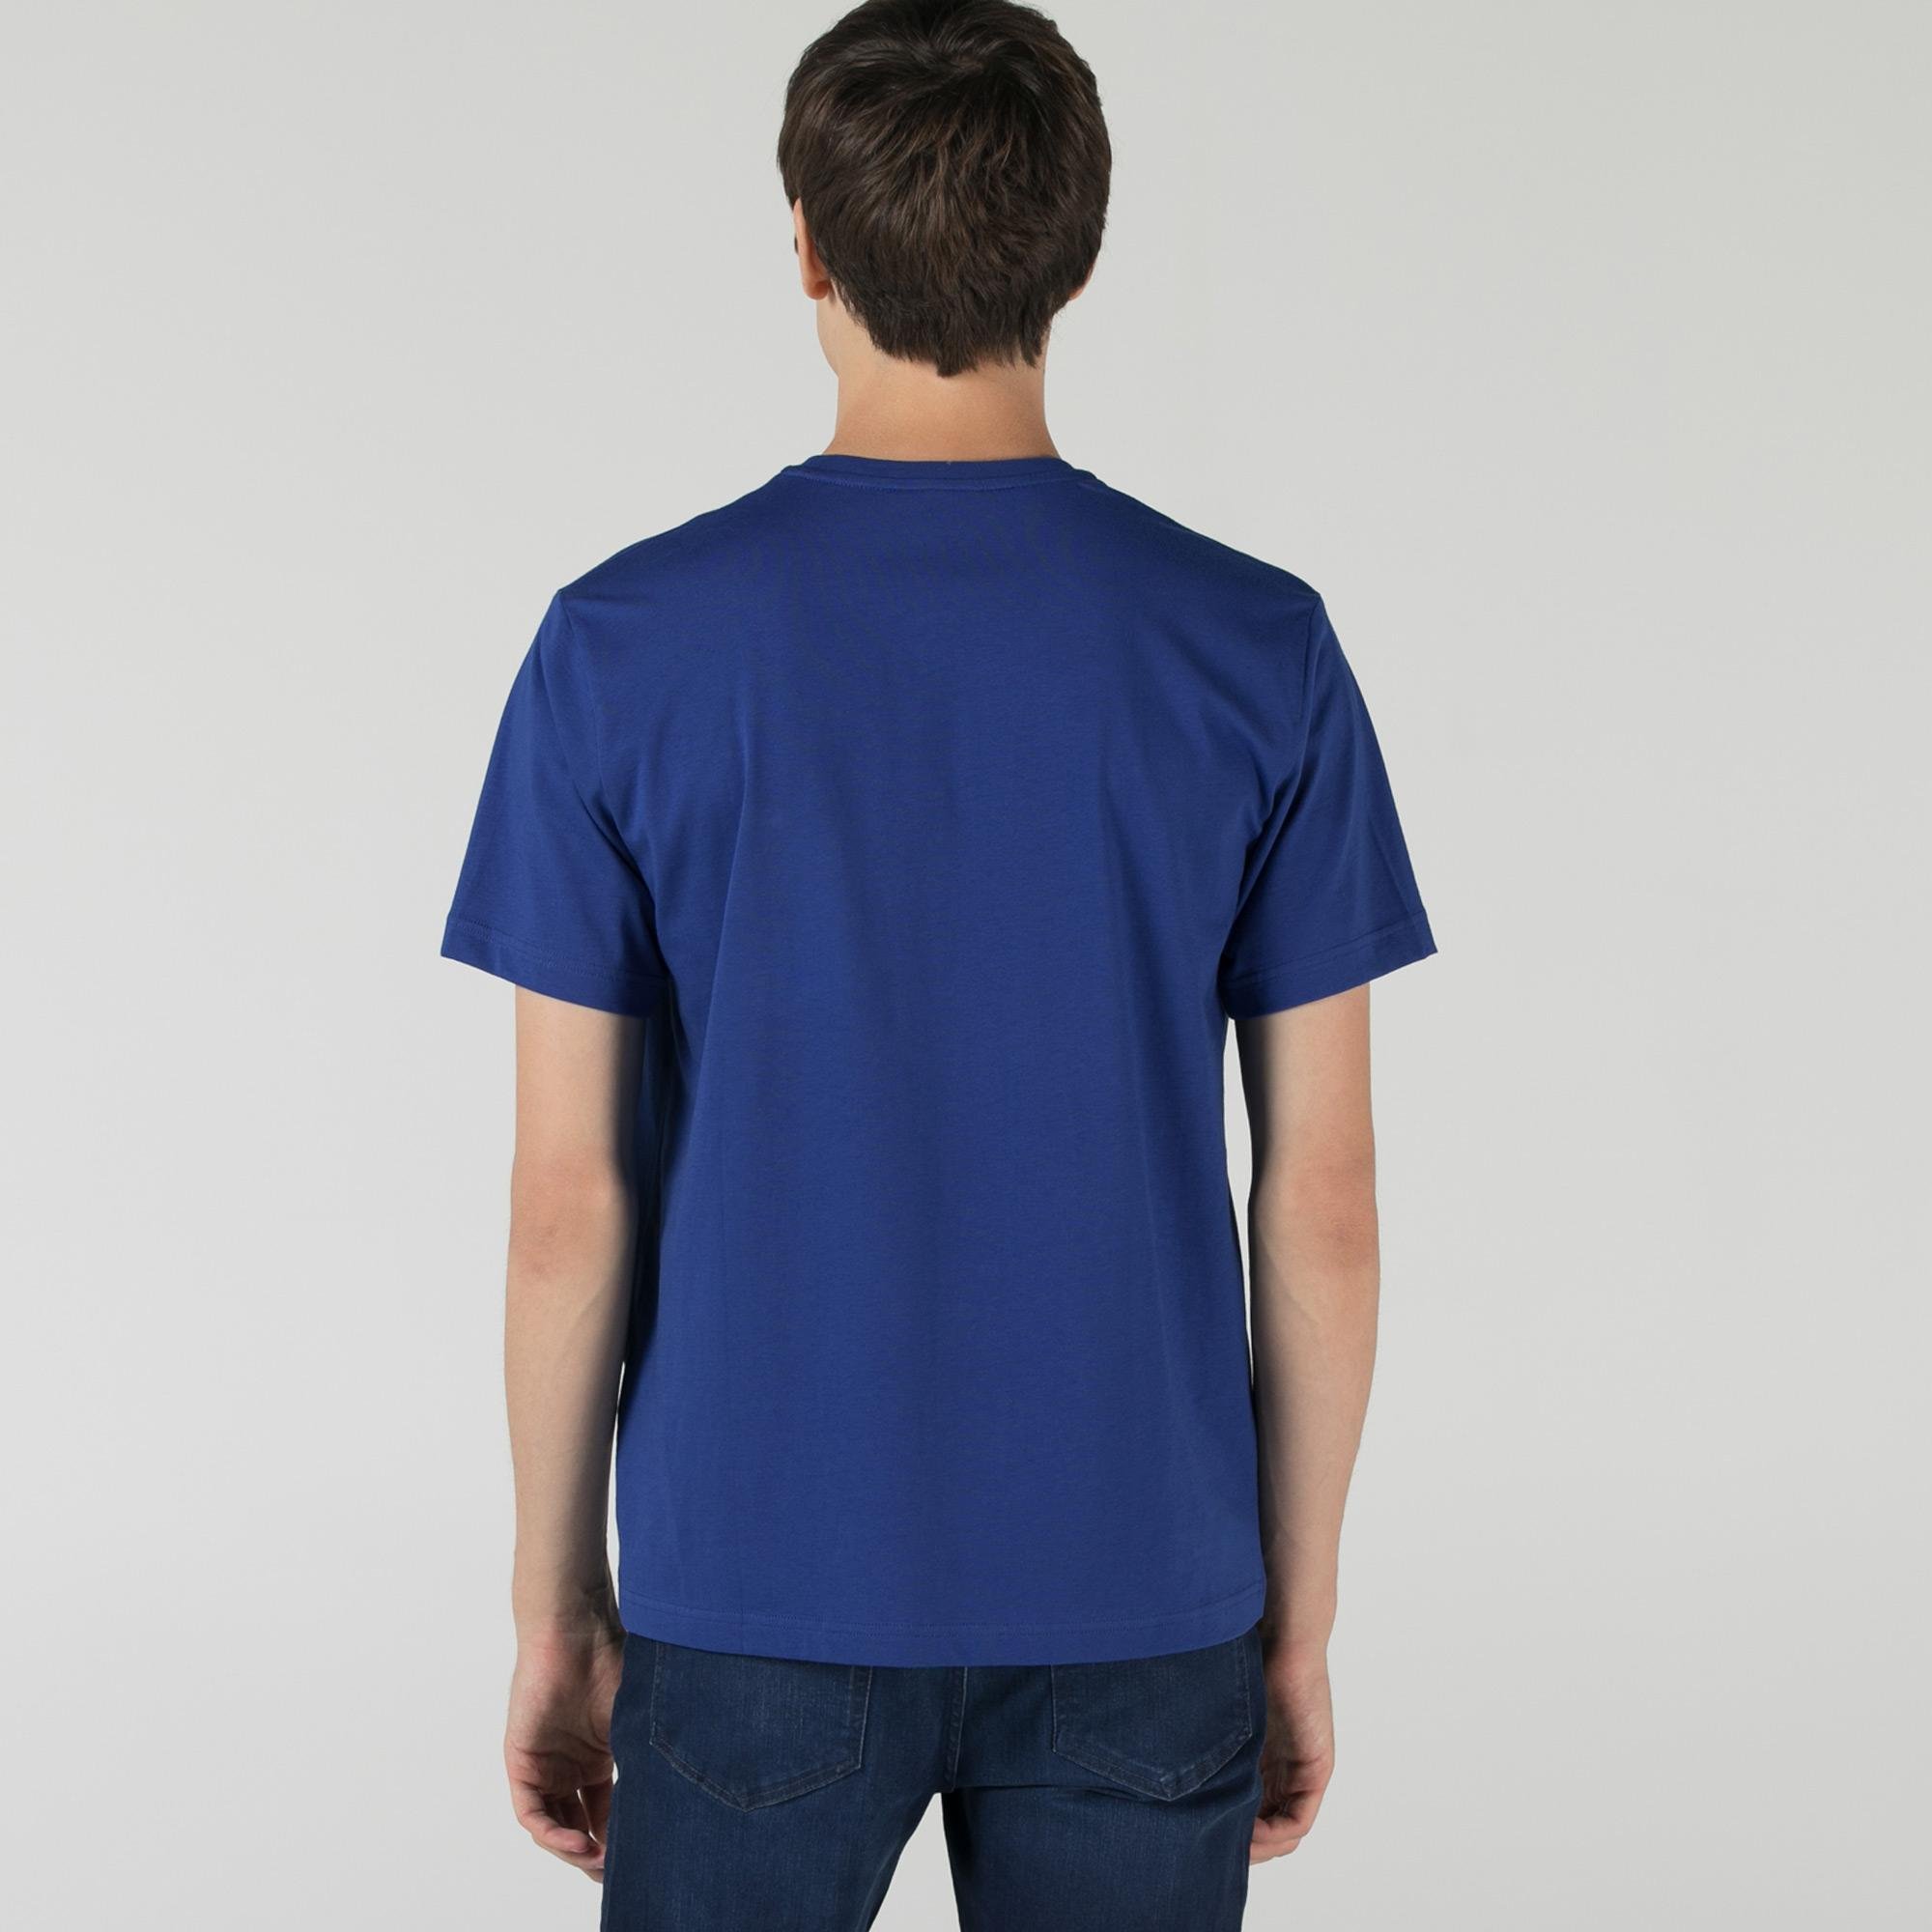 Lacoste Men's Relaxed Fit T-shirt